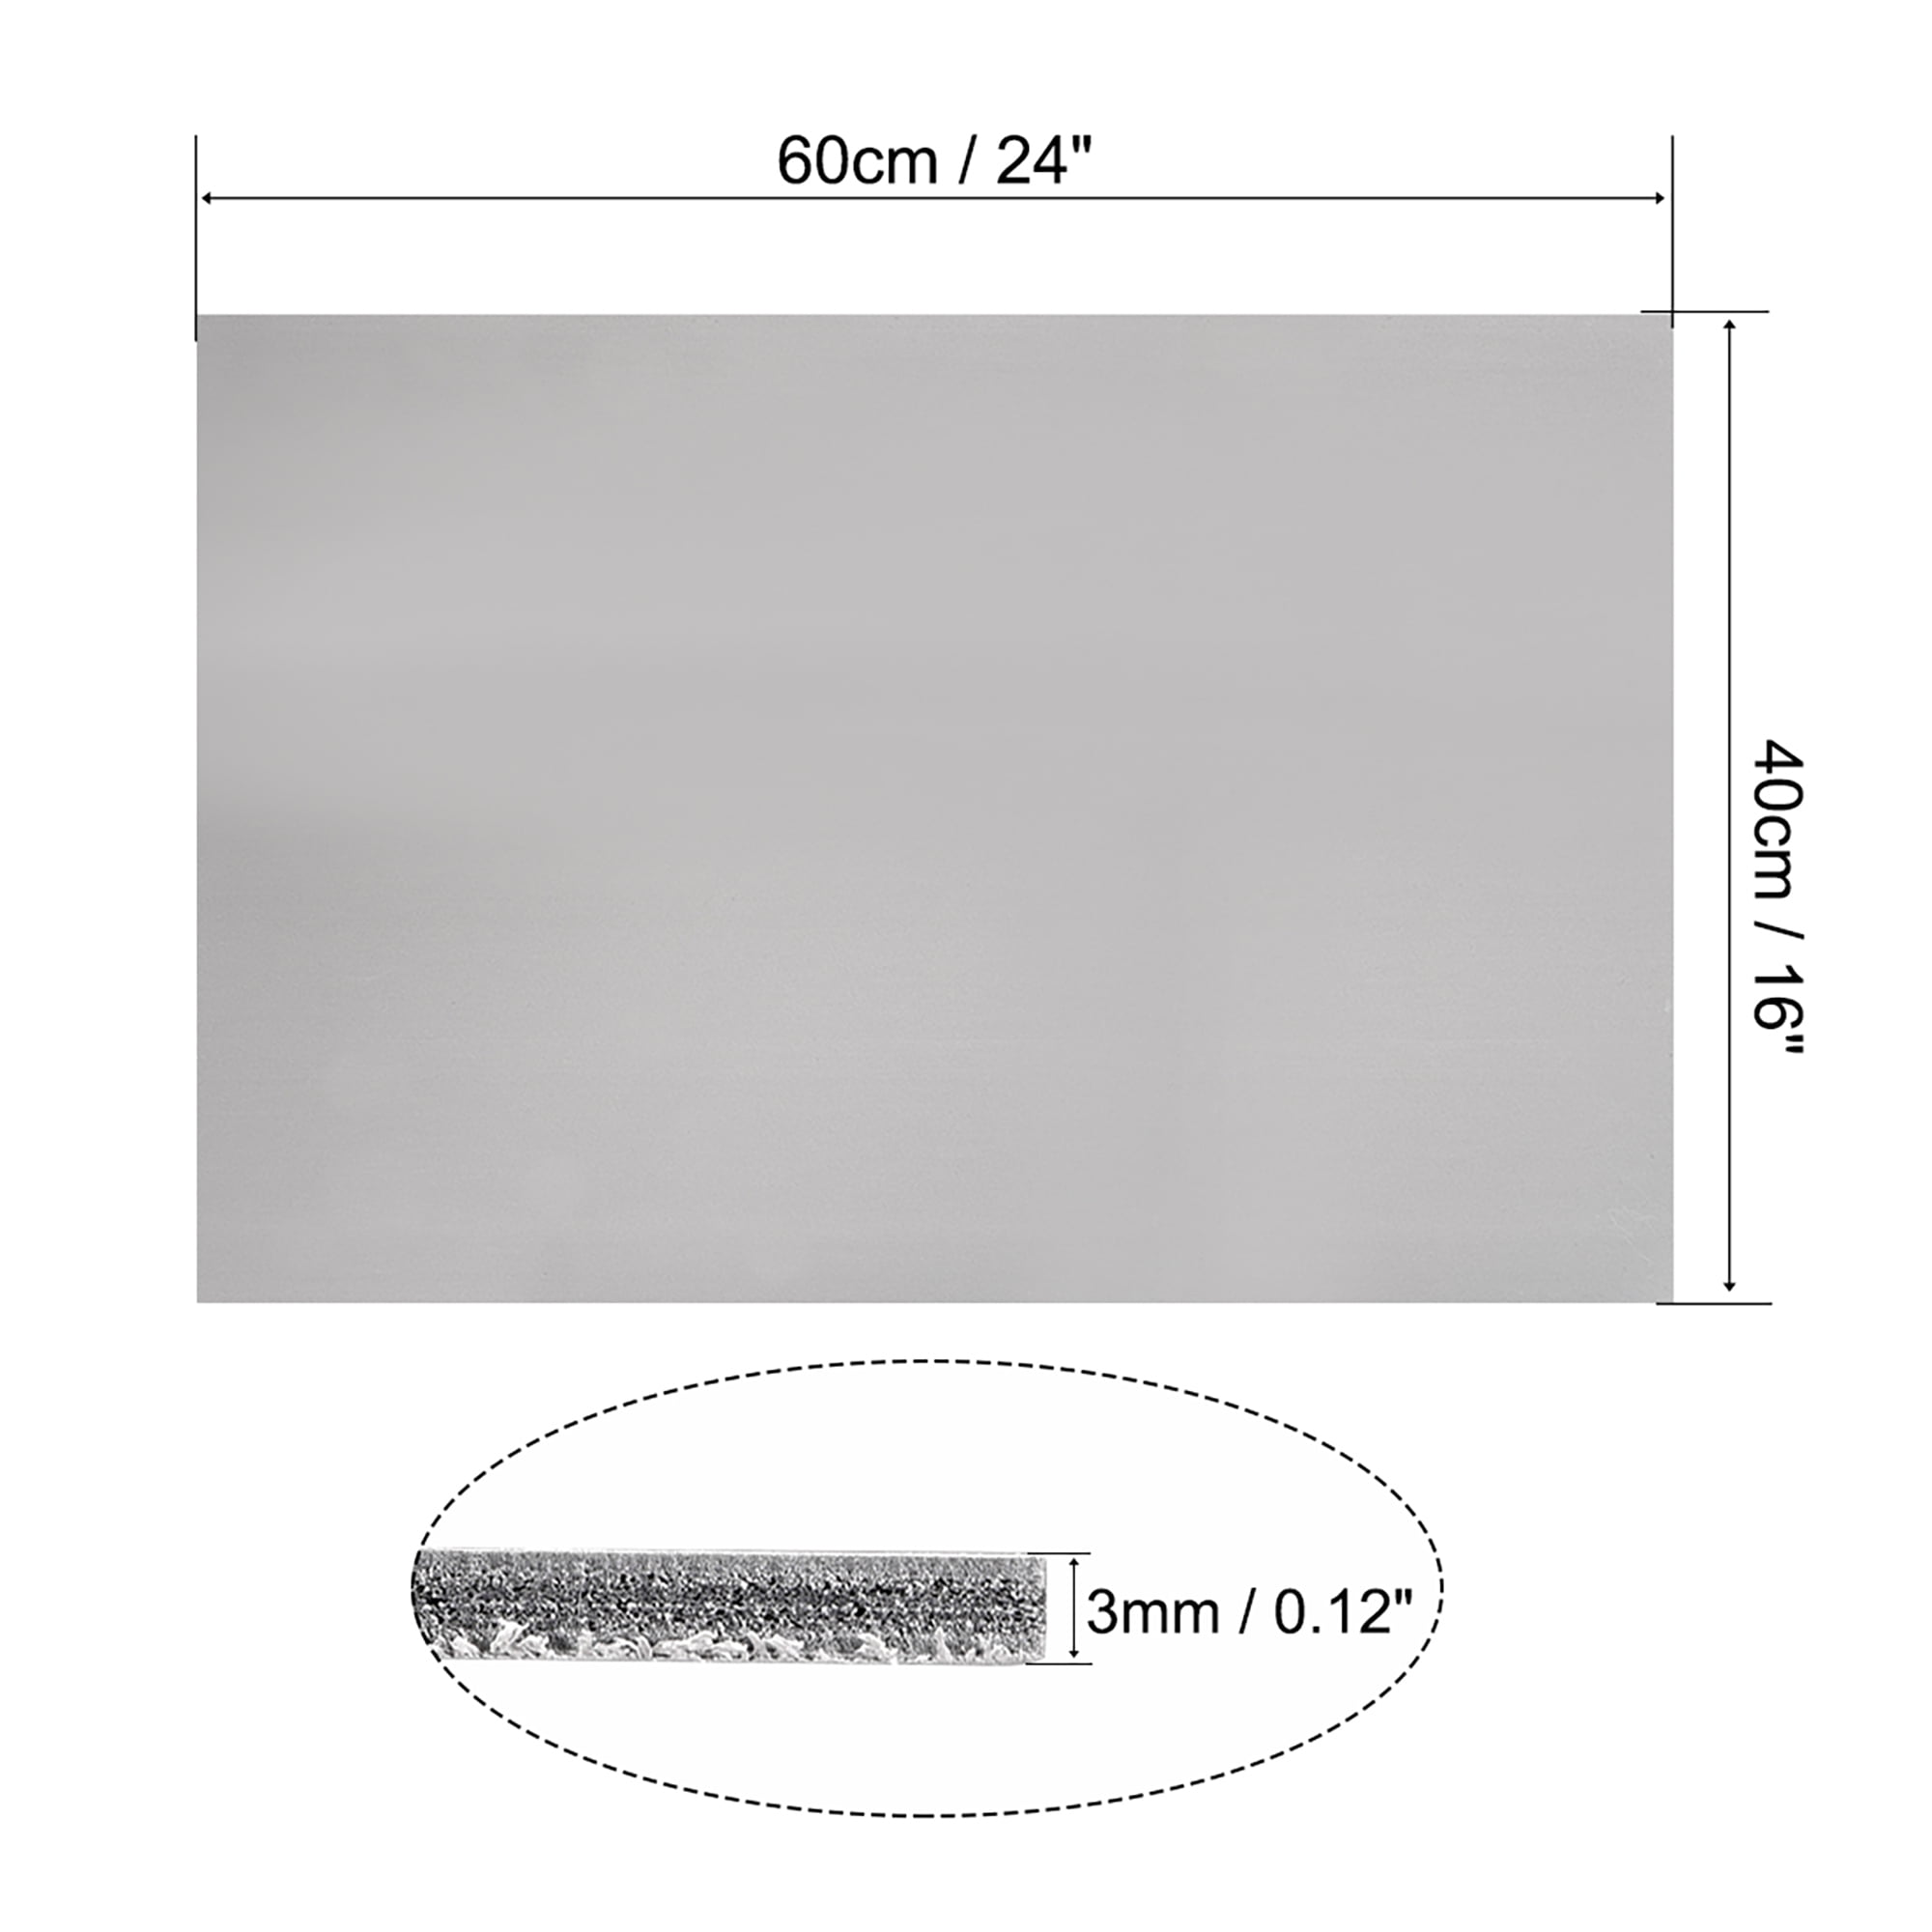 Details about   PVC Foam Board Sheet,3mmT x16"Wx24“L,White,Double Sided,Expanded PVC Sheet 